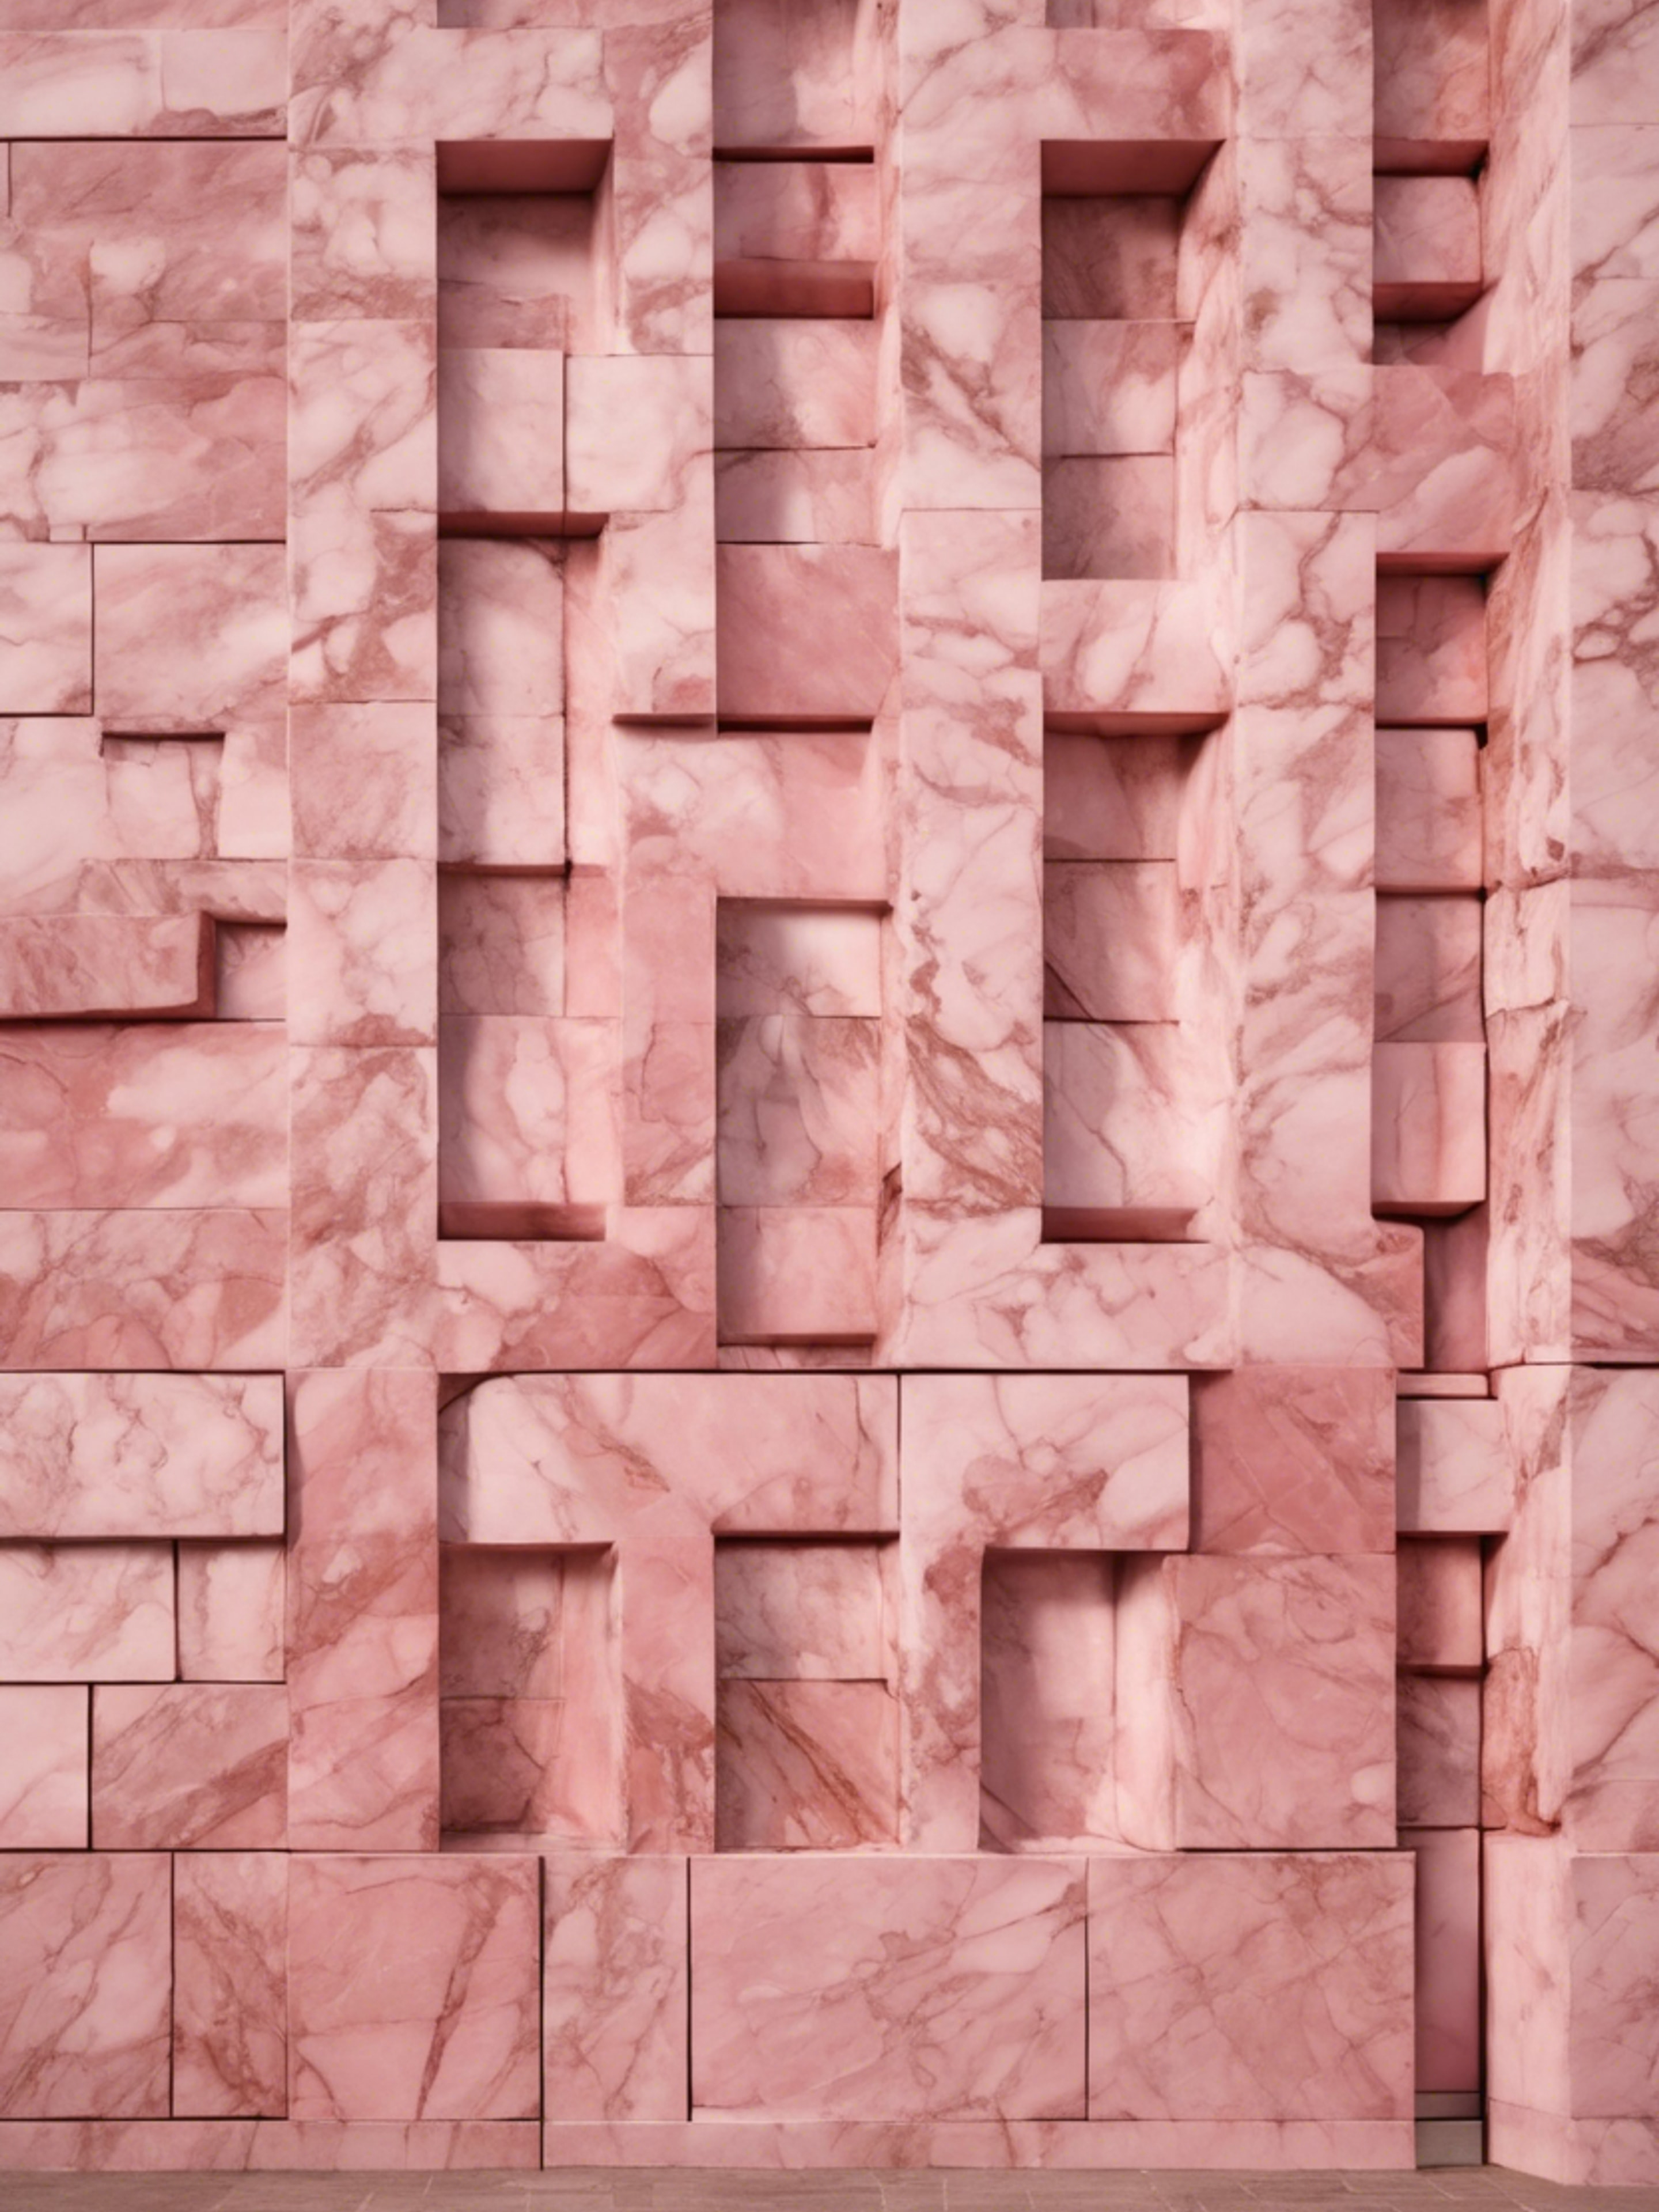 An outdoor wall of a building, made of polished pink marble. Wallpaper[24255f95efd34f59a019]